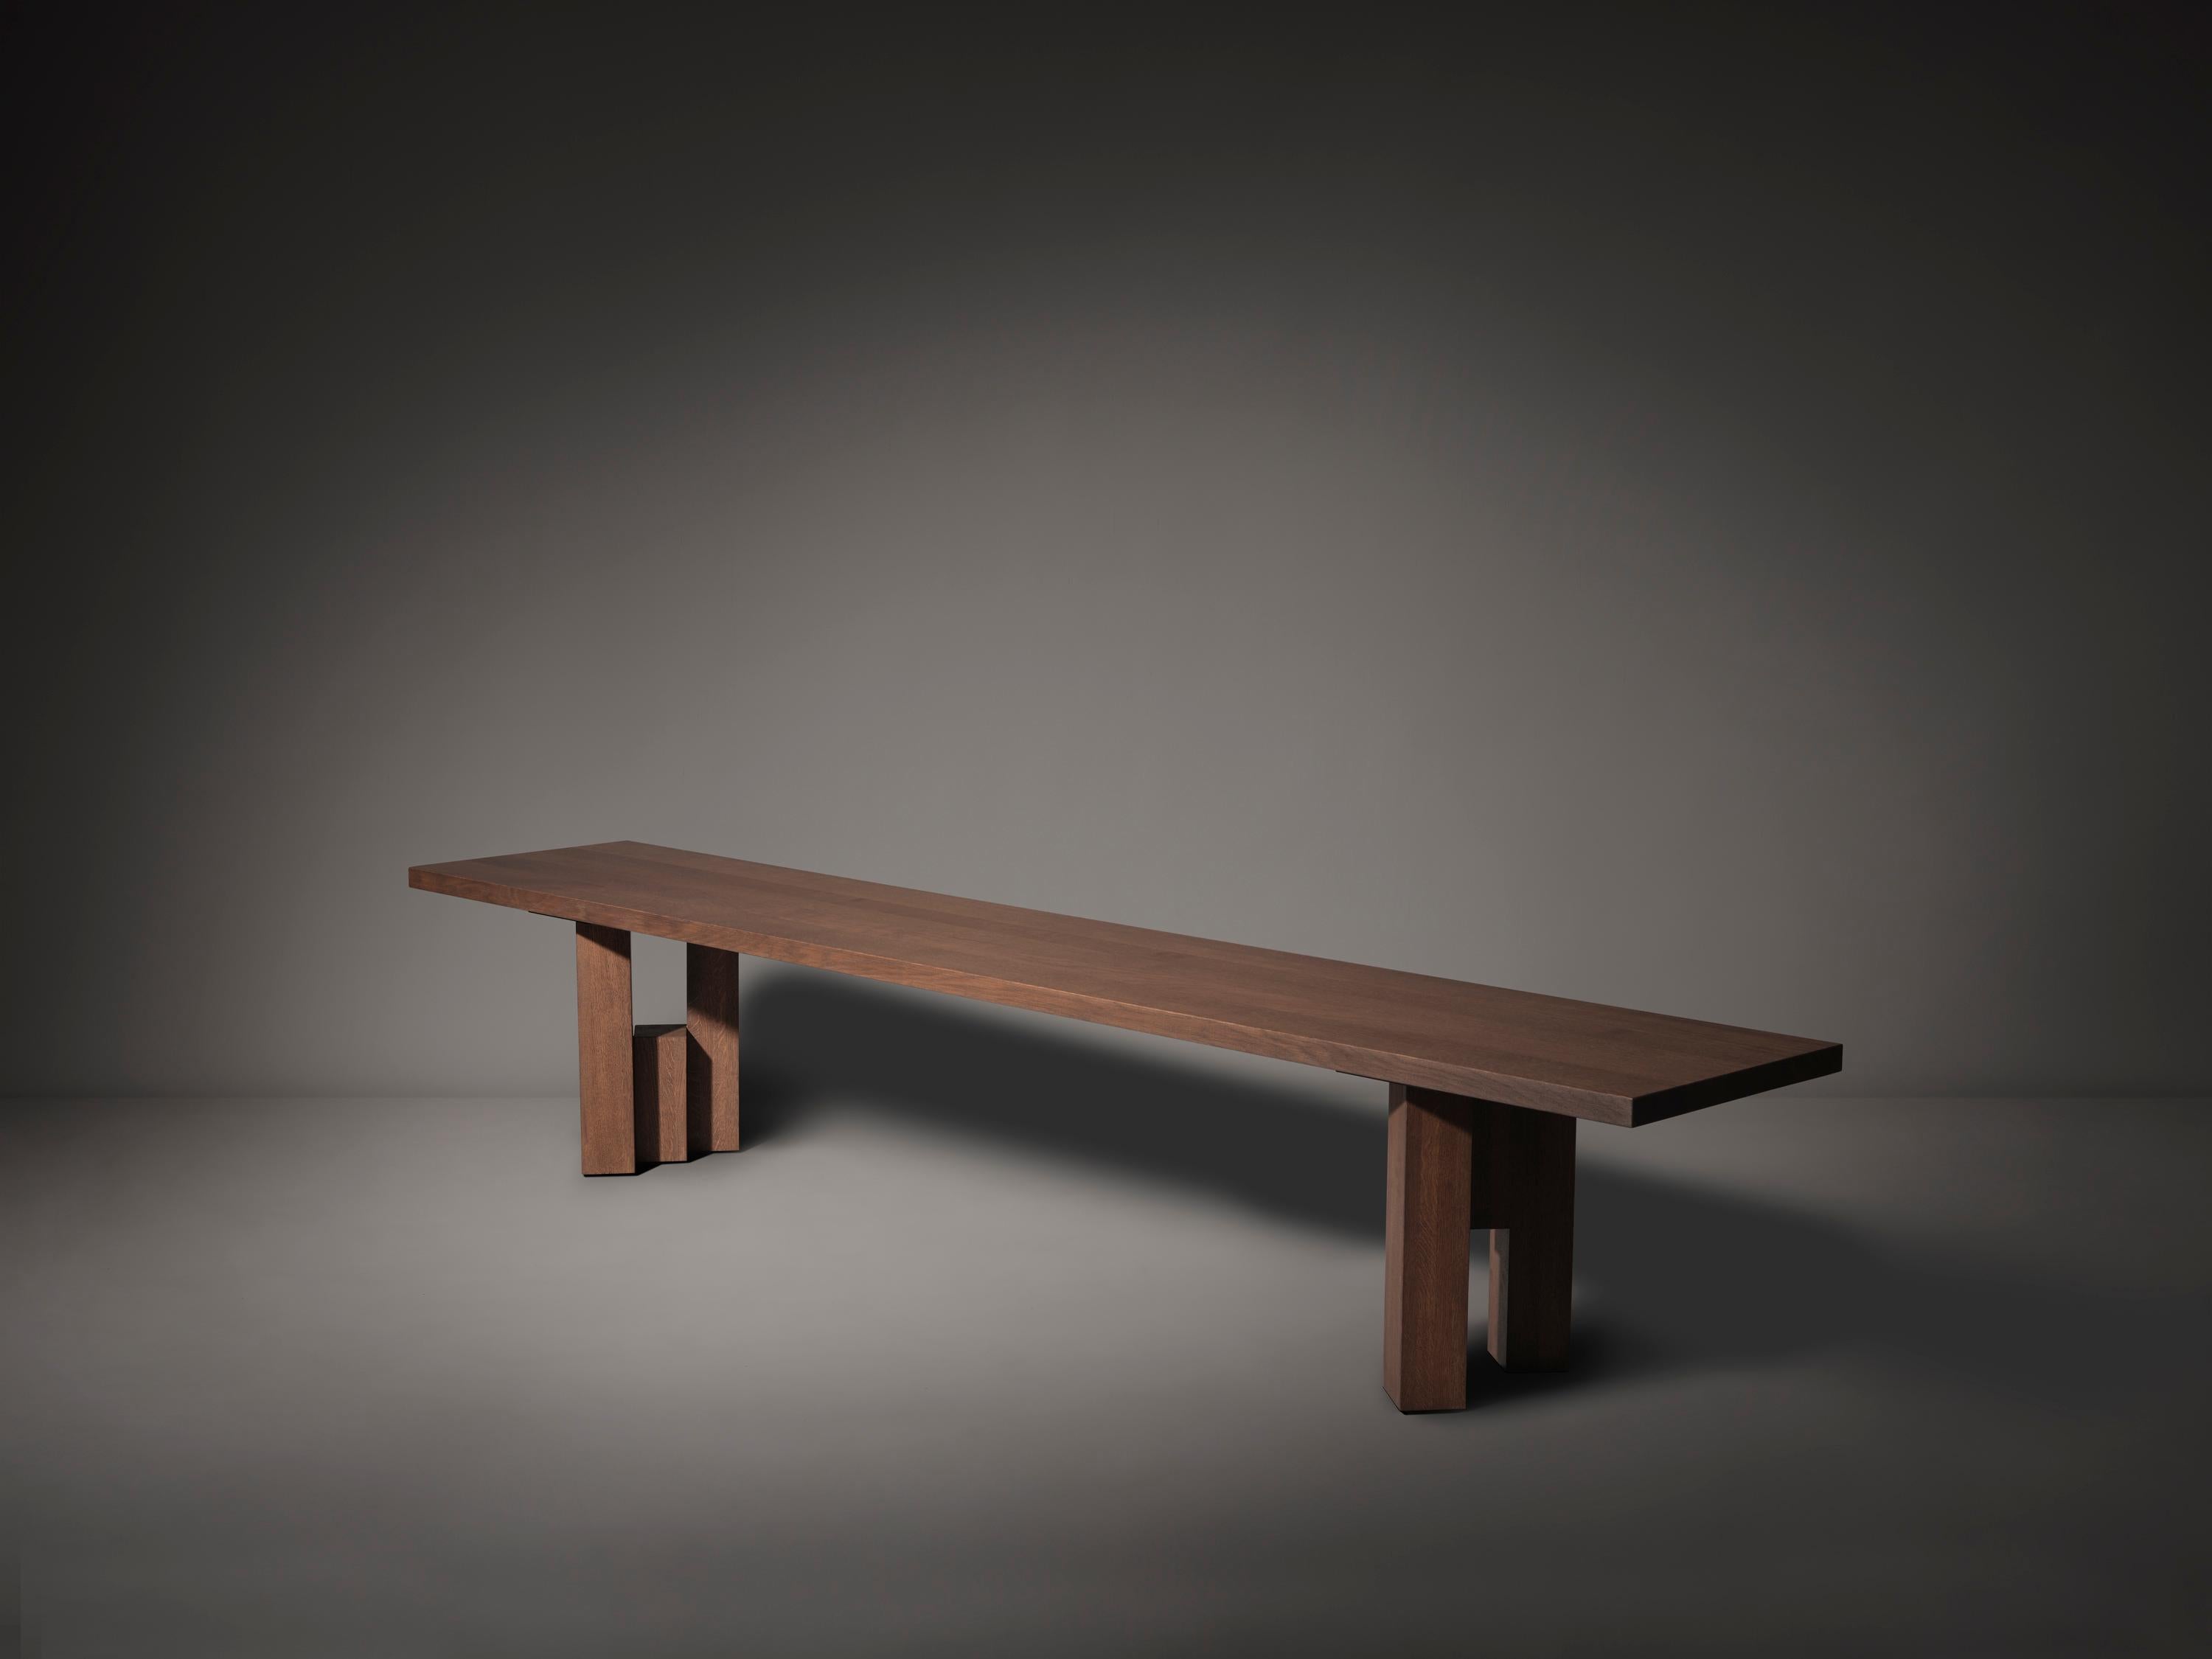 The Fenestra bench takes cues from Brutalism and Amsterdam School architecture and made out of solid hardwood. The bench is designed to match the Fenestra dining table but is also as a separate product available. The bench is designed by Aad Bos and